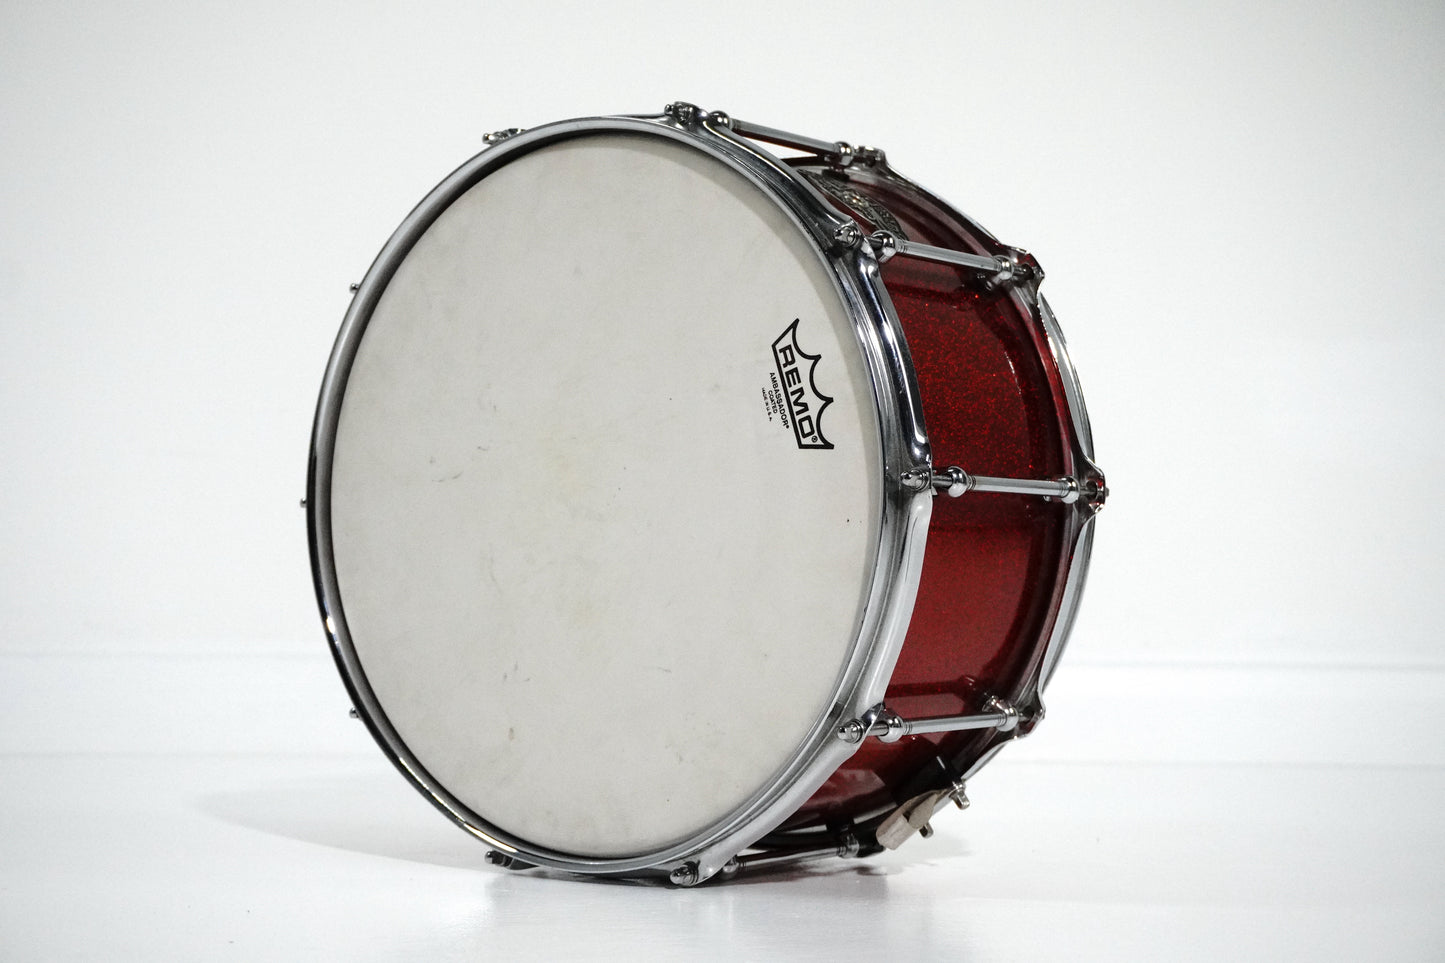 Premier Modern Classic Snare in Red Moon Sparkle 14" x 7"